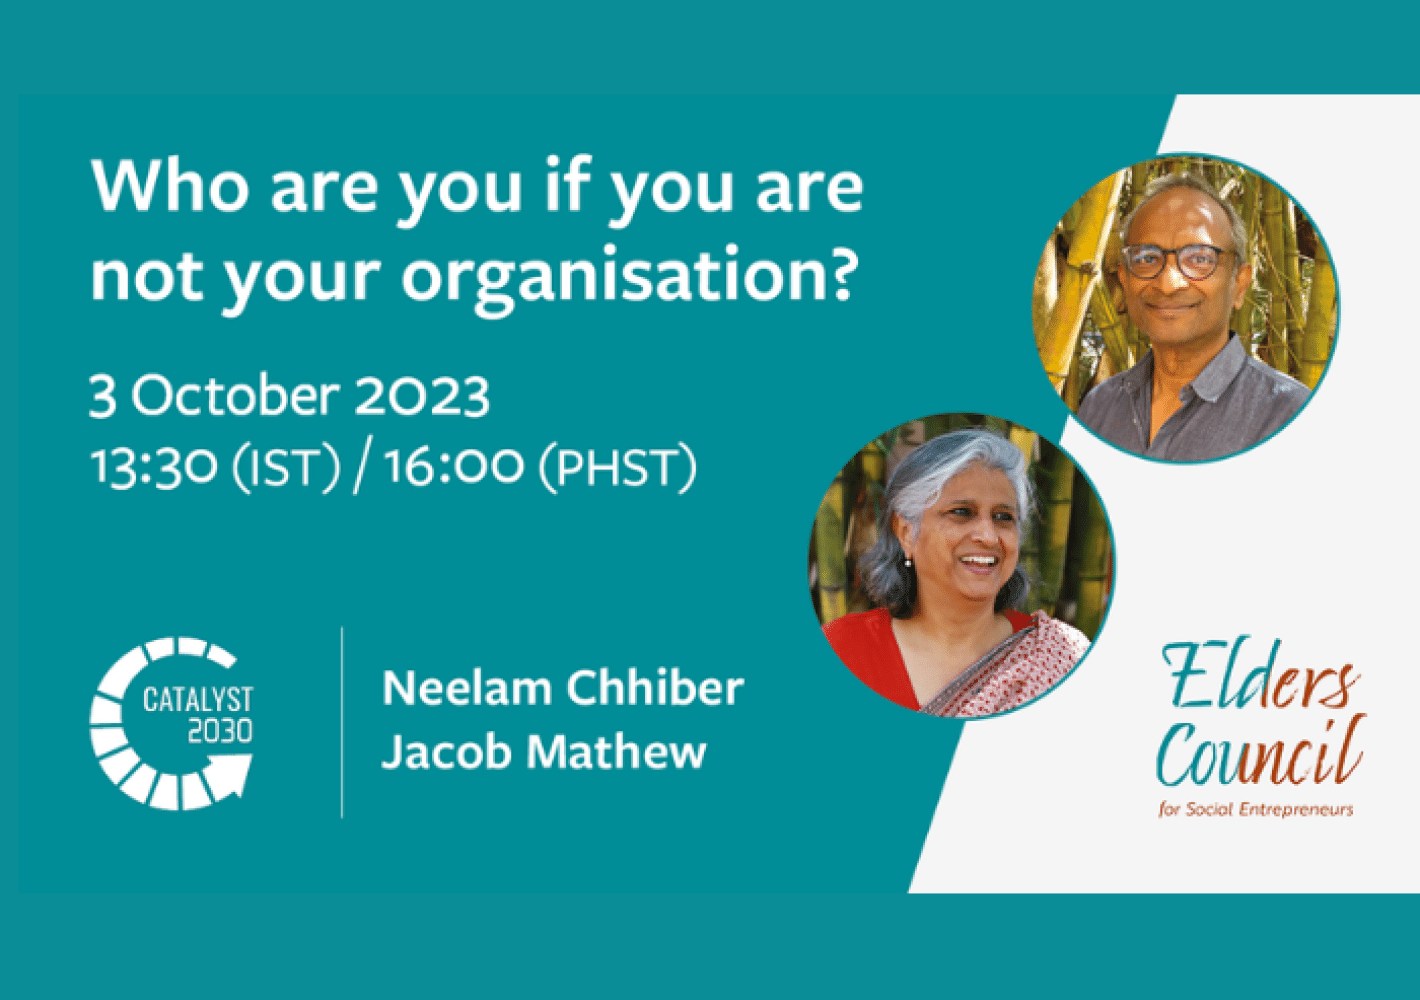 Elders Council Webinar_Who are you if you are not your organisation